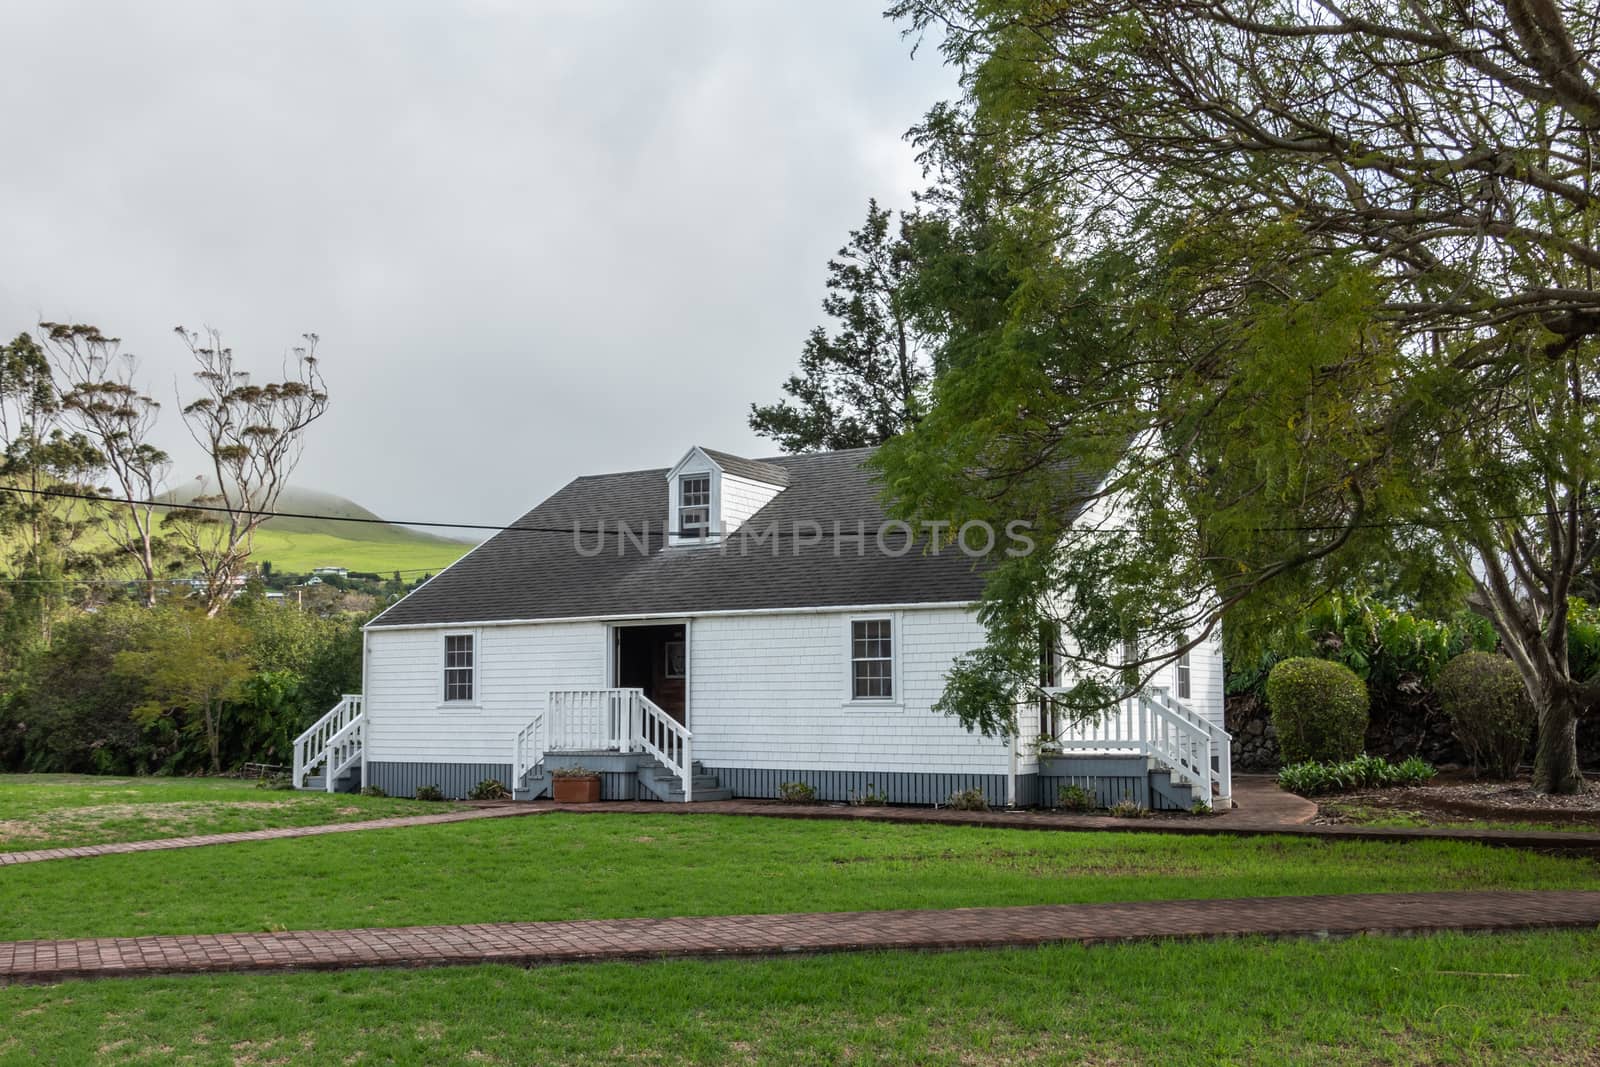 Waimea, Hawaii, USA. - January 15, 2020: Parker Ranch headquarters. White wooden house surrounded by green trees behind green lawn and under light blue cloudscape.